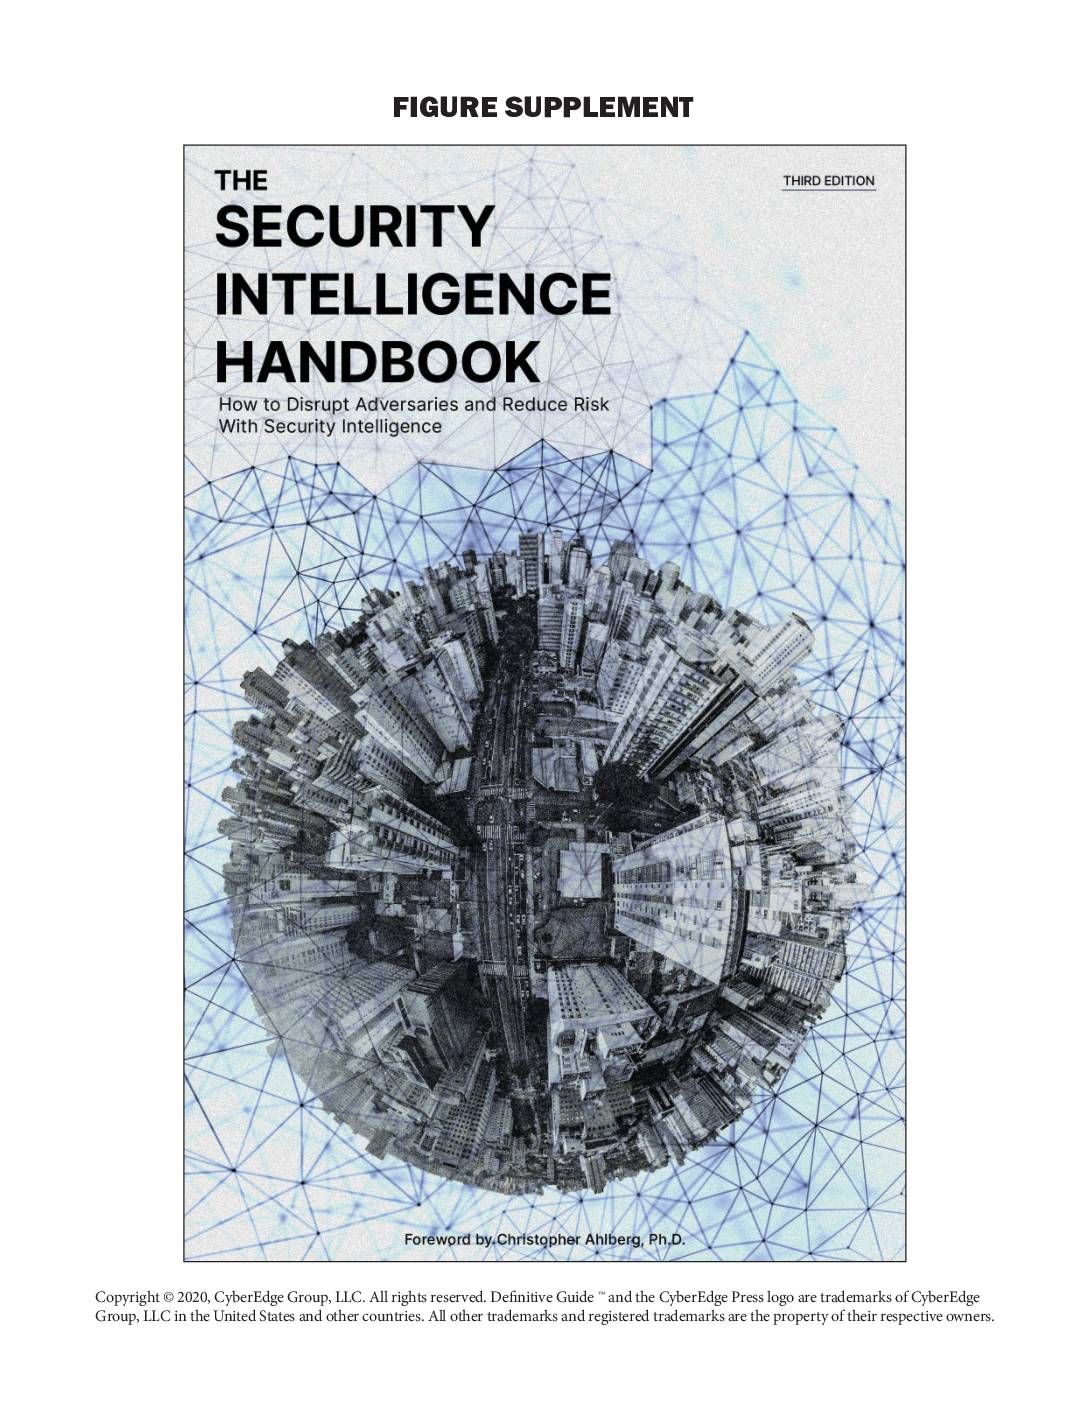 Featured image for Audiobook Figures Supplement: The Security Intelligence Handbook, Third Edition